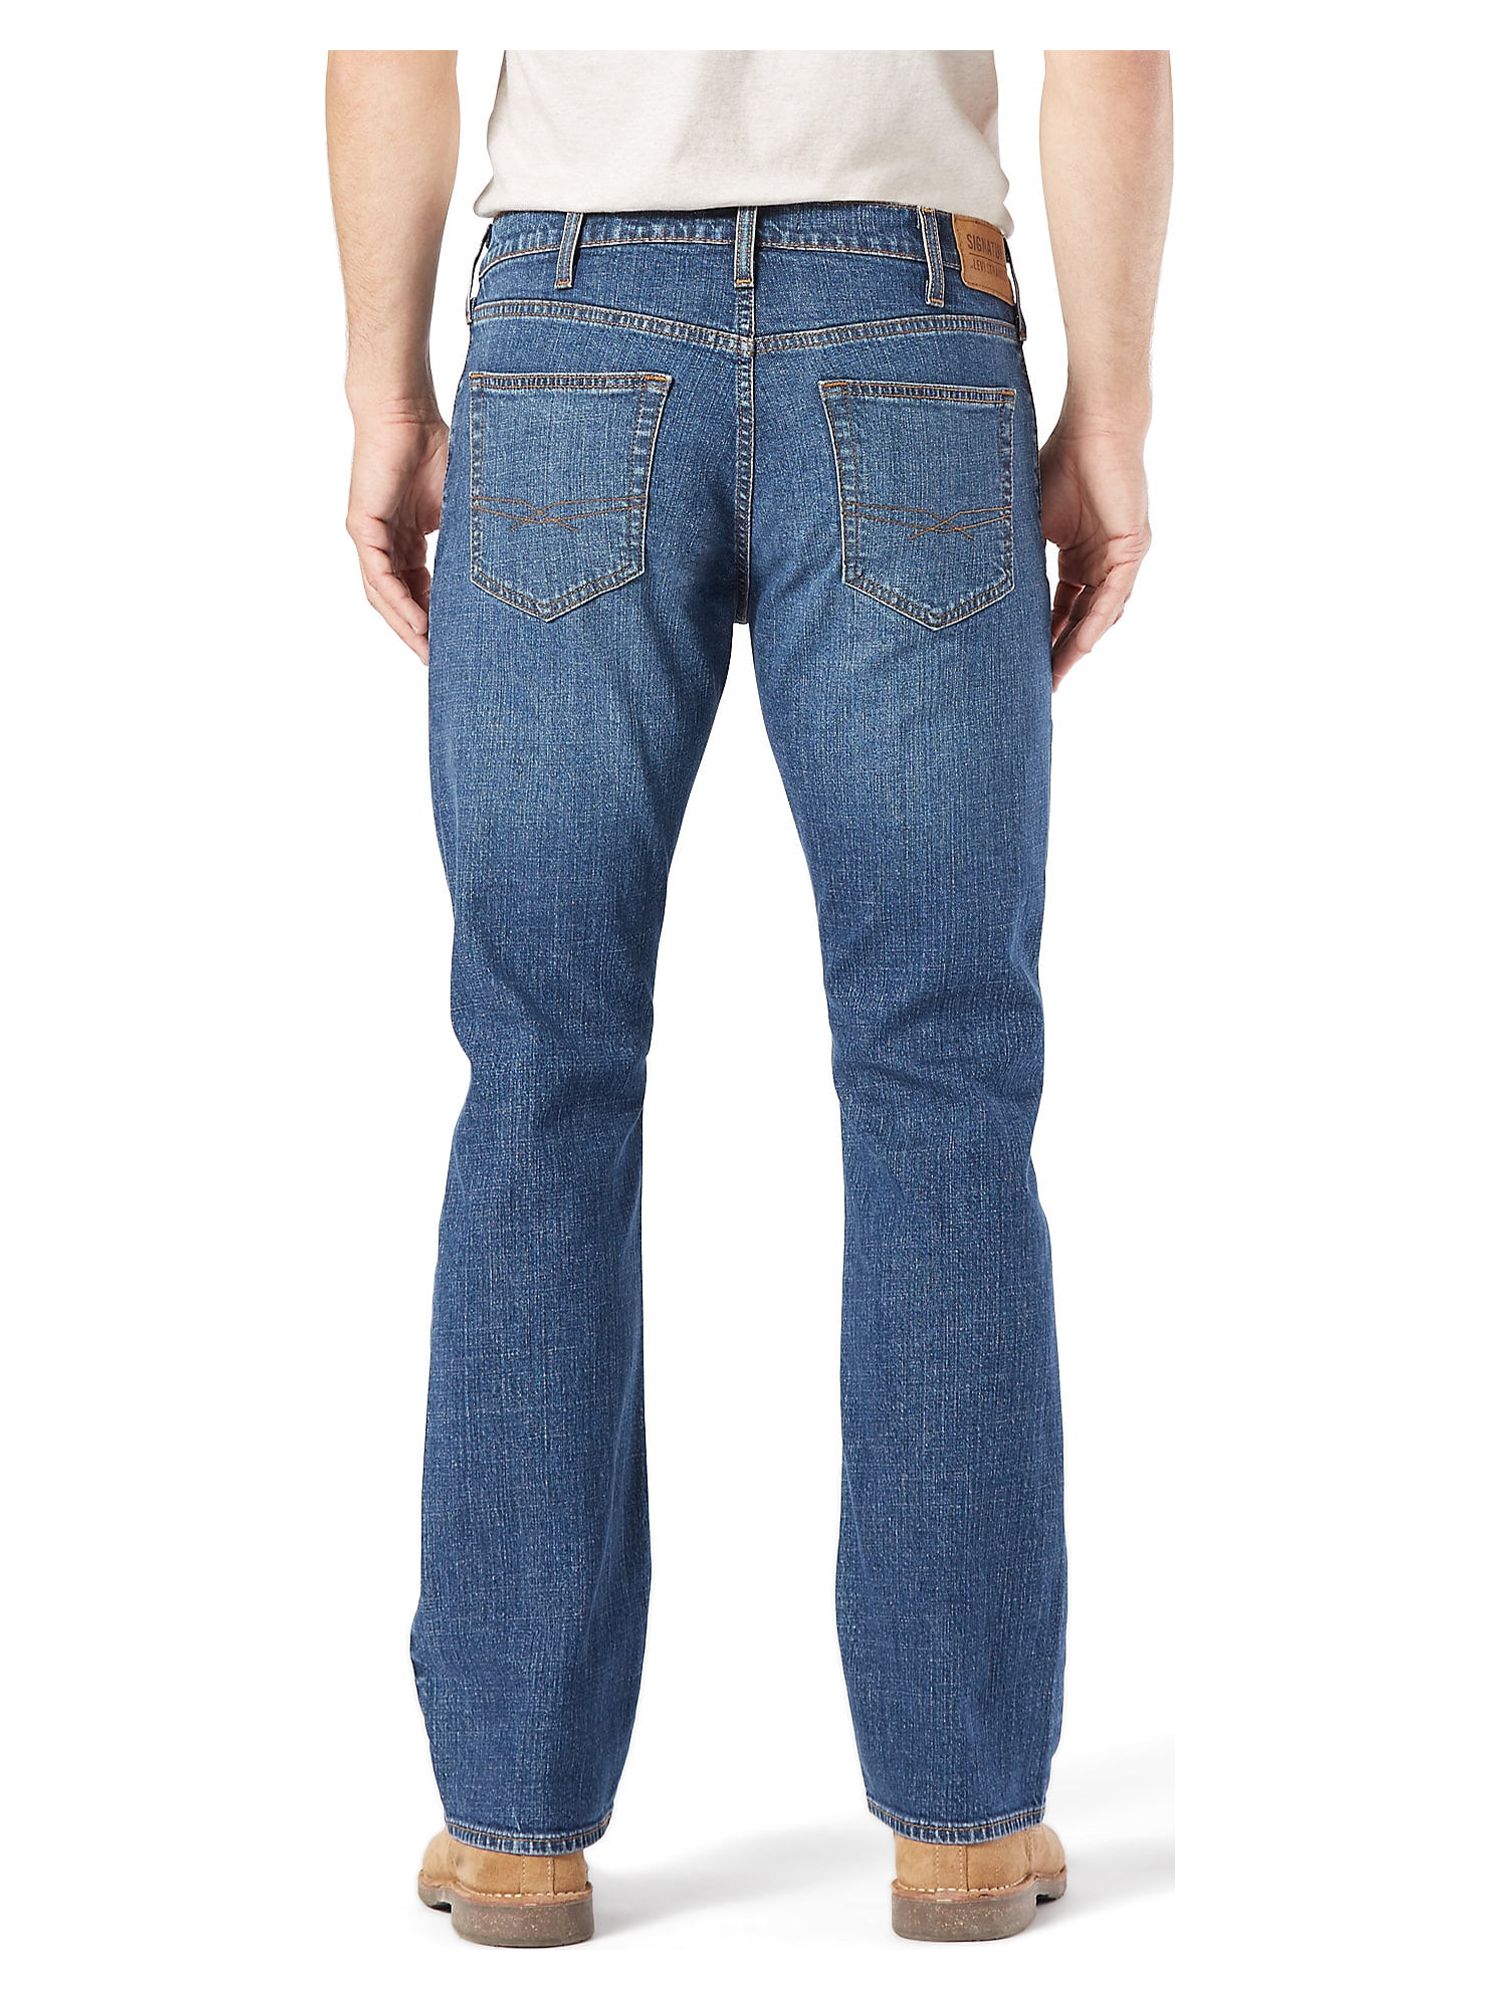 Signature by Levi Strauss & Co. Men's and Big and Tall Bootcut Jeans - image 4 of 7